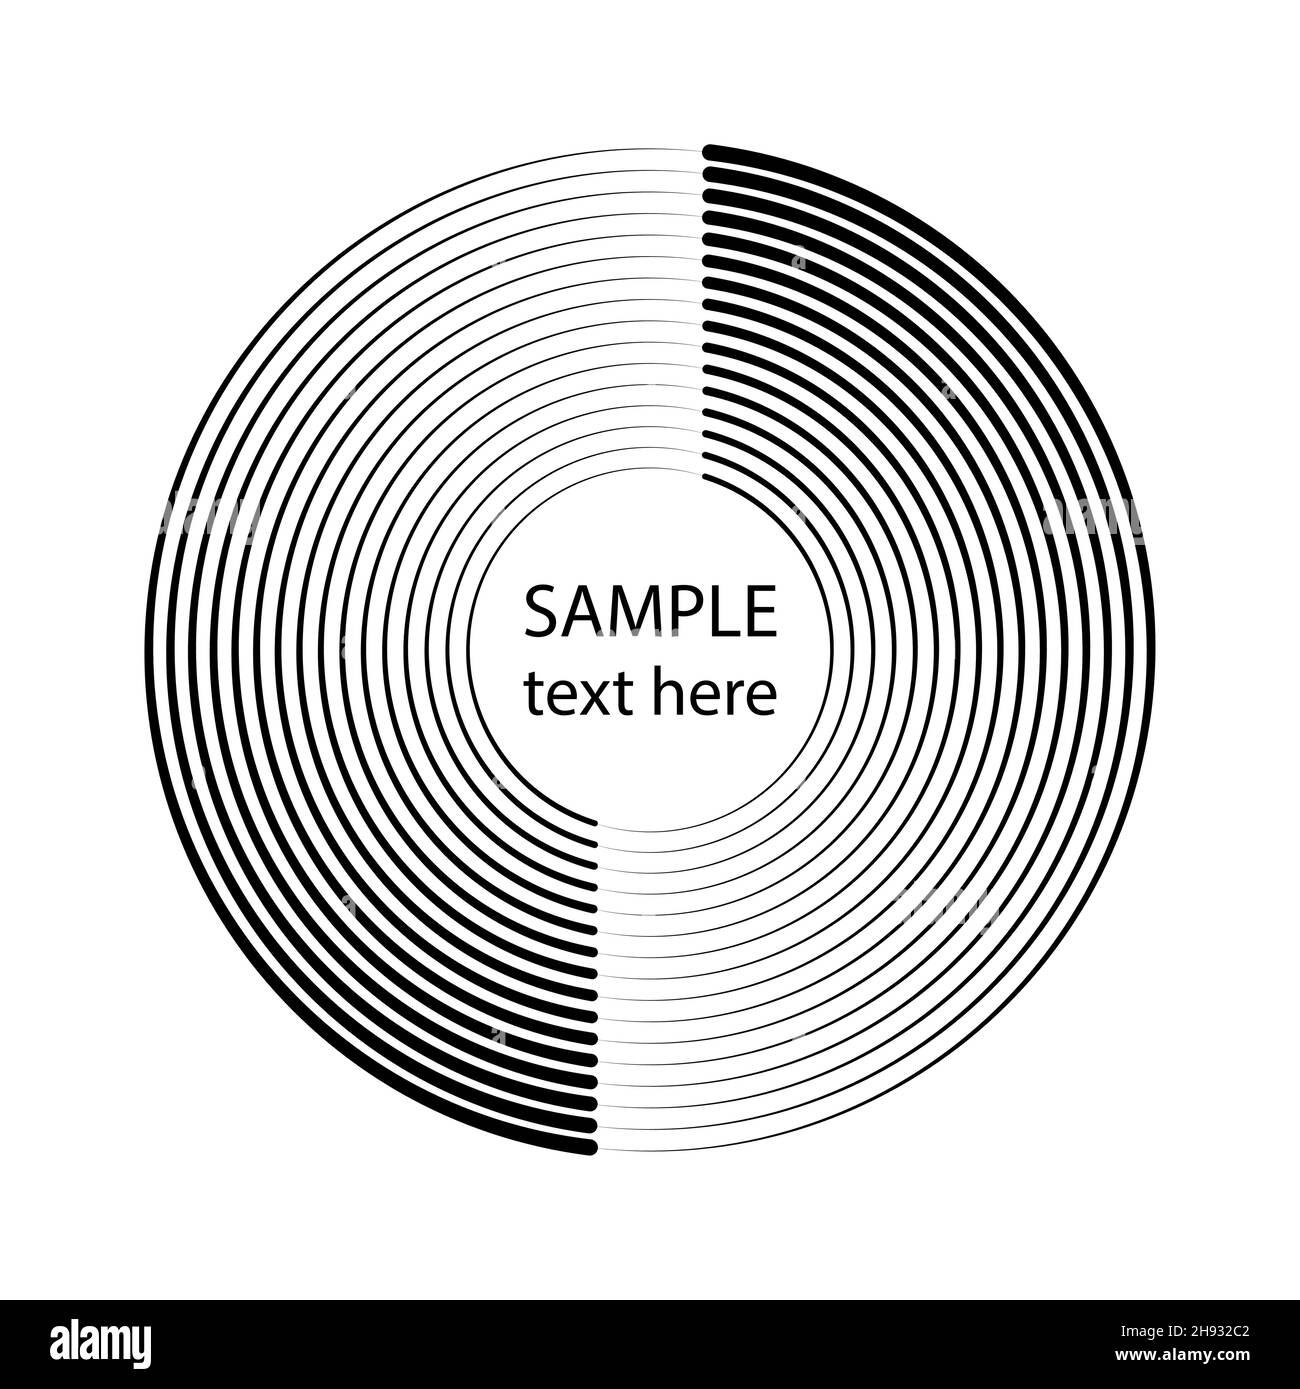 Black concentric lines in circle form. Geometric art. Trendy design element for frame, logo, tattoo, sign, symbol, web pages, prints, posters Stock Vector